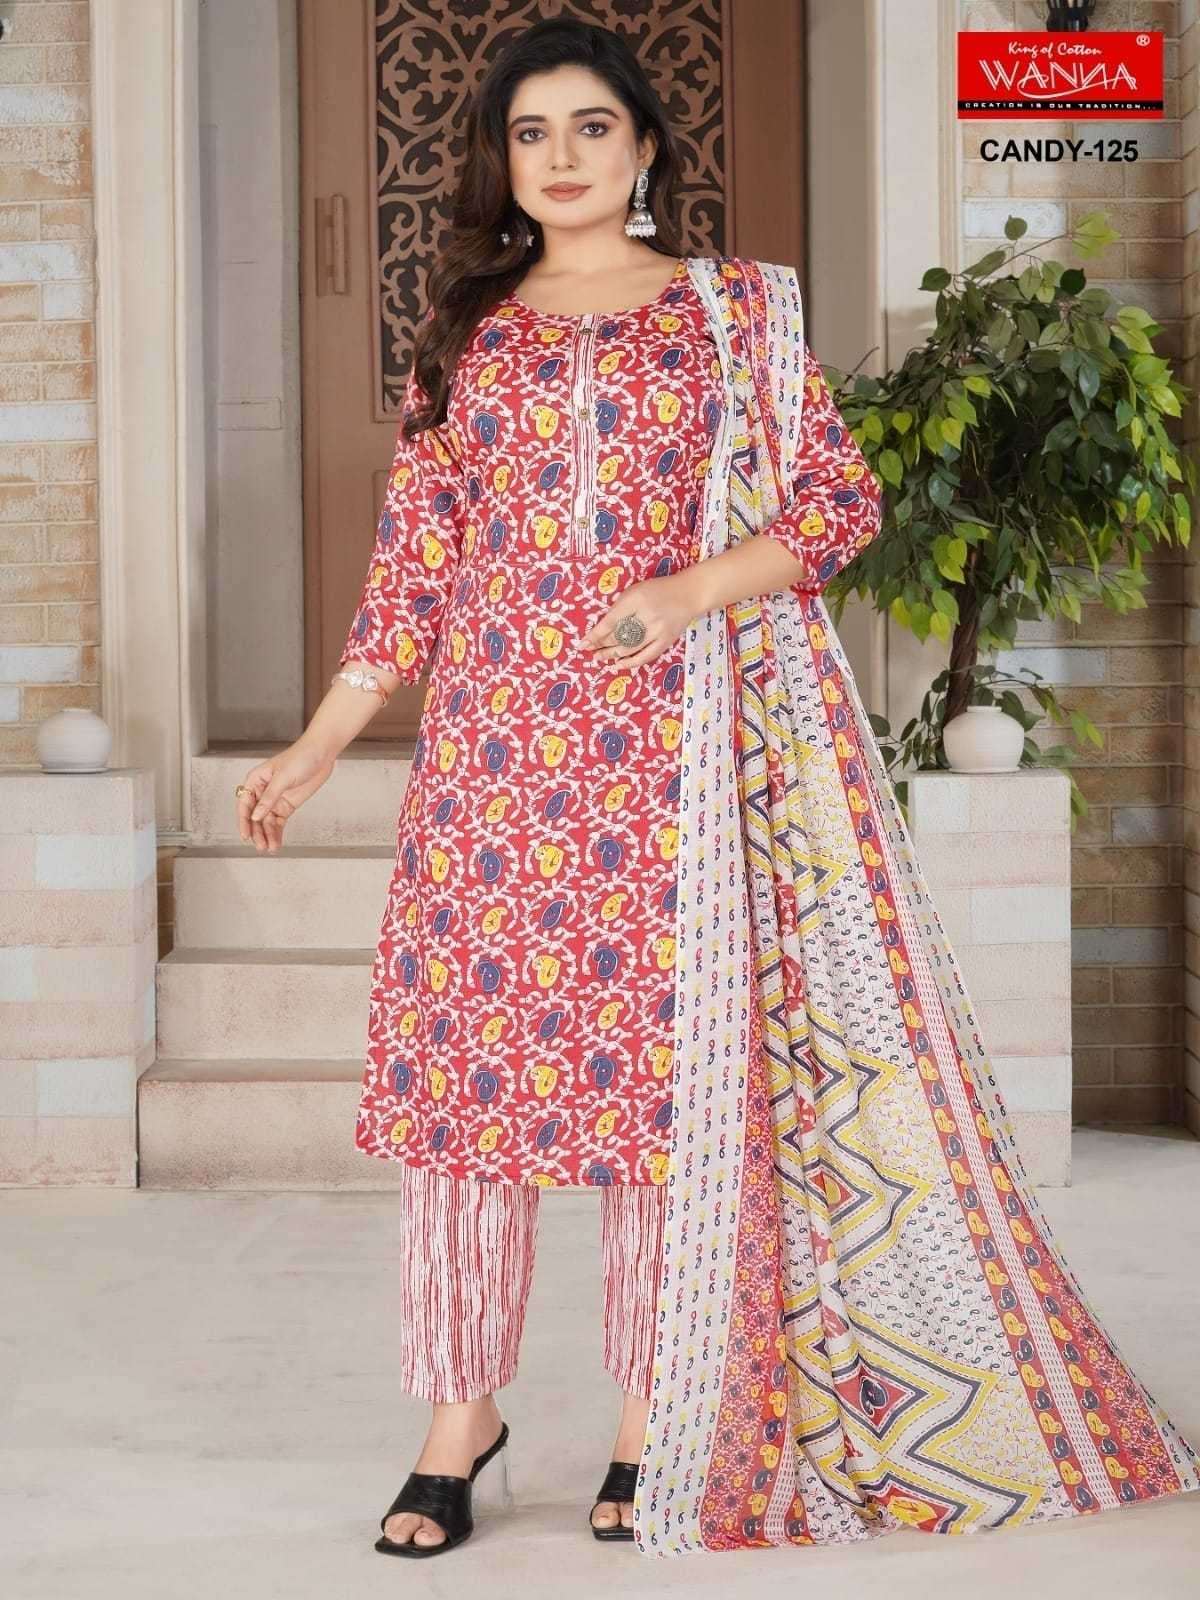 wanna candy series 121-130 Two tone To Two tone cotton readymade suit